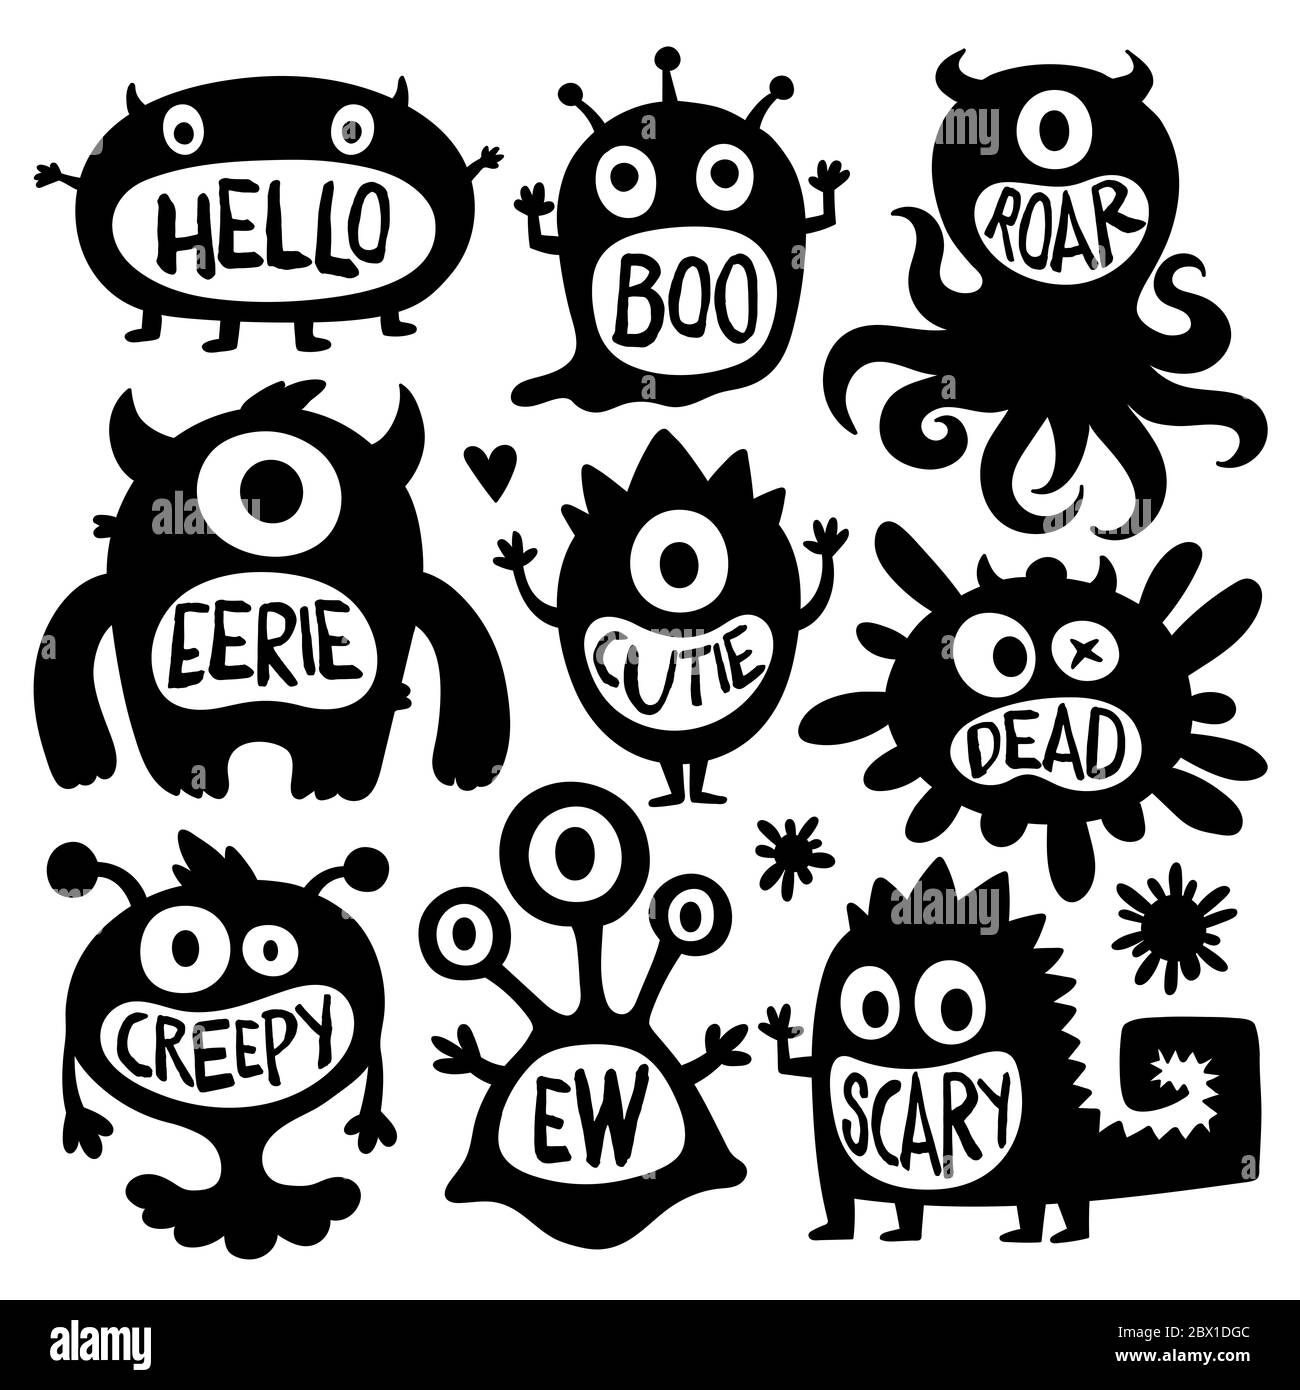 Flat black and white design style cartoon vector illustration set of cute monsters vectors. Scary spooky and creepy creatures isolated on white backgr Stock Photo